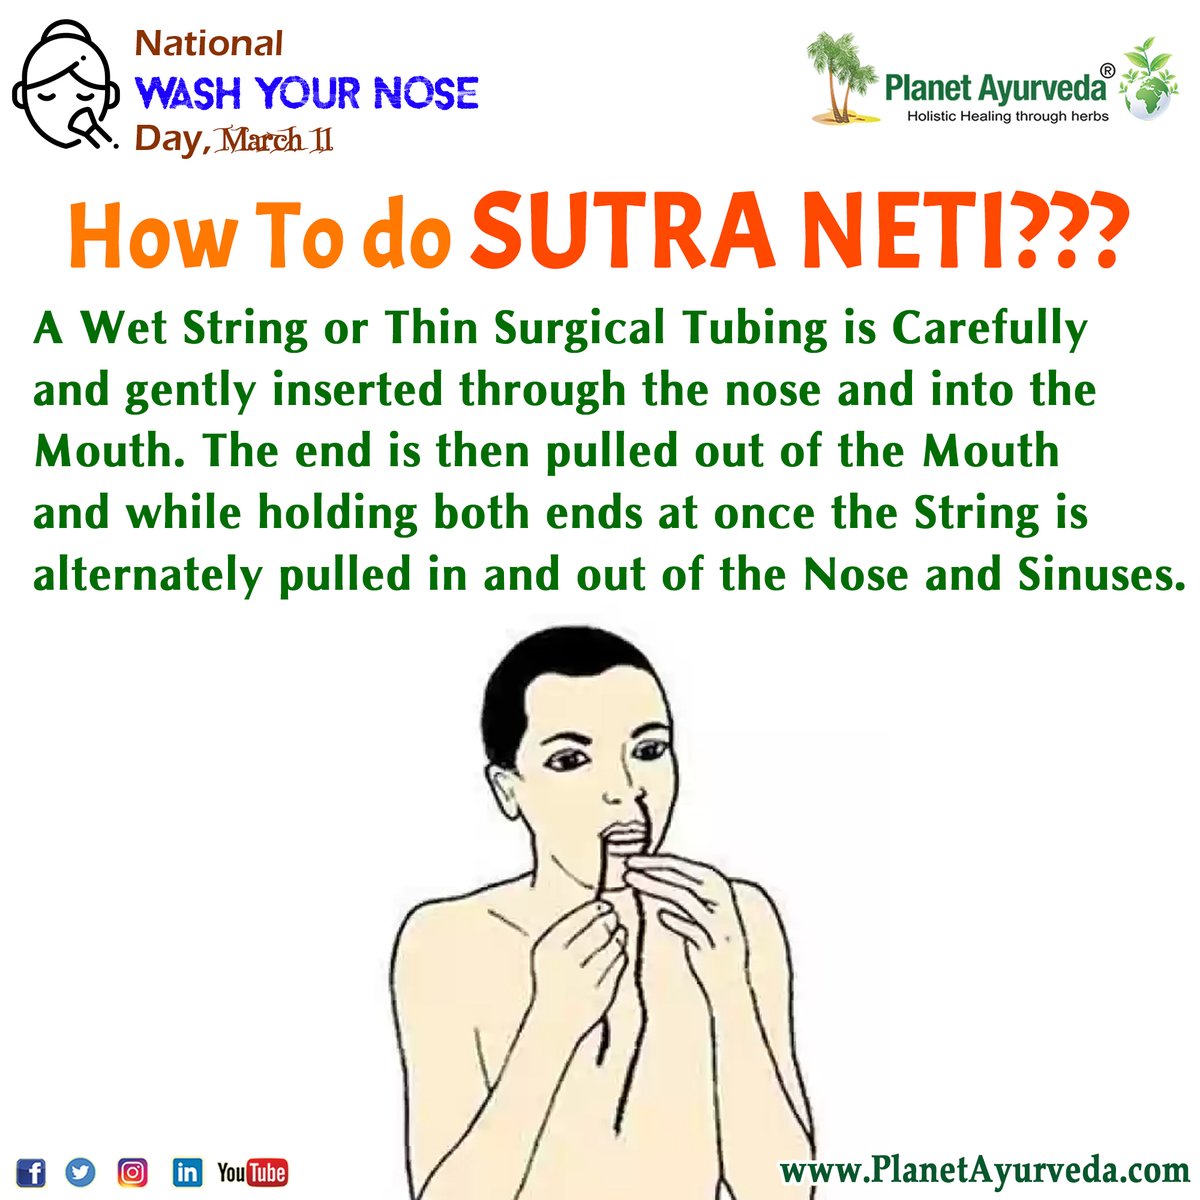 What!! Washing the Nose is Also Important to Stay Healthy. Let's See the Correct Ayurvedic Way

#WashYourNose #WashYourNoseDay #NationalWashYourNoseDay #WashYourNoseDay #NationalWashYourNoseDay #nasal #nasalaspirator #nasalspray #aspirator #Nose #Important #Healthy #NoseWashing…